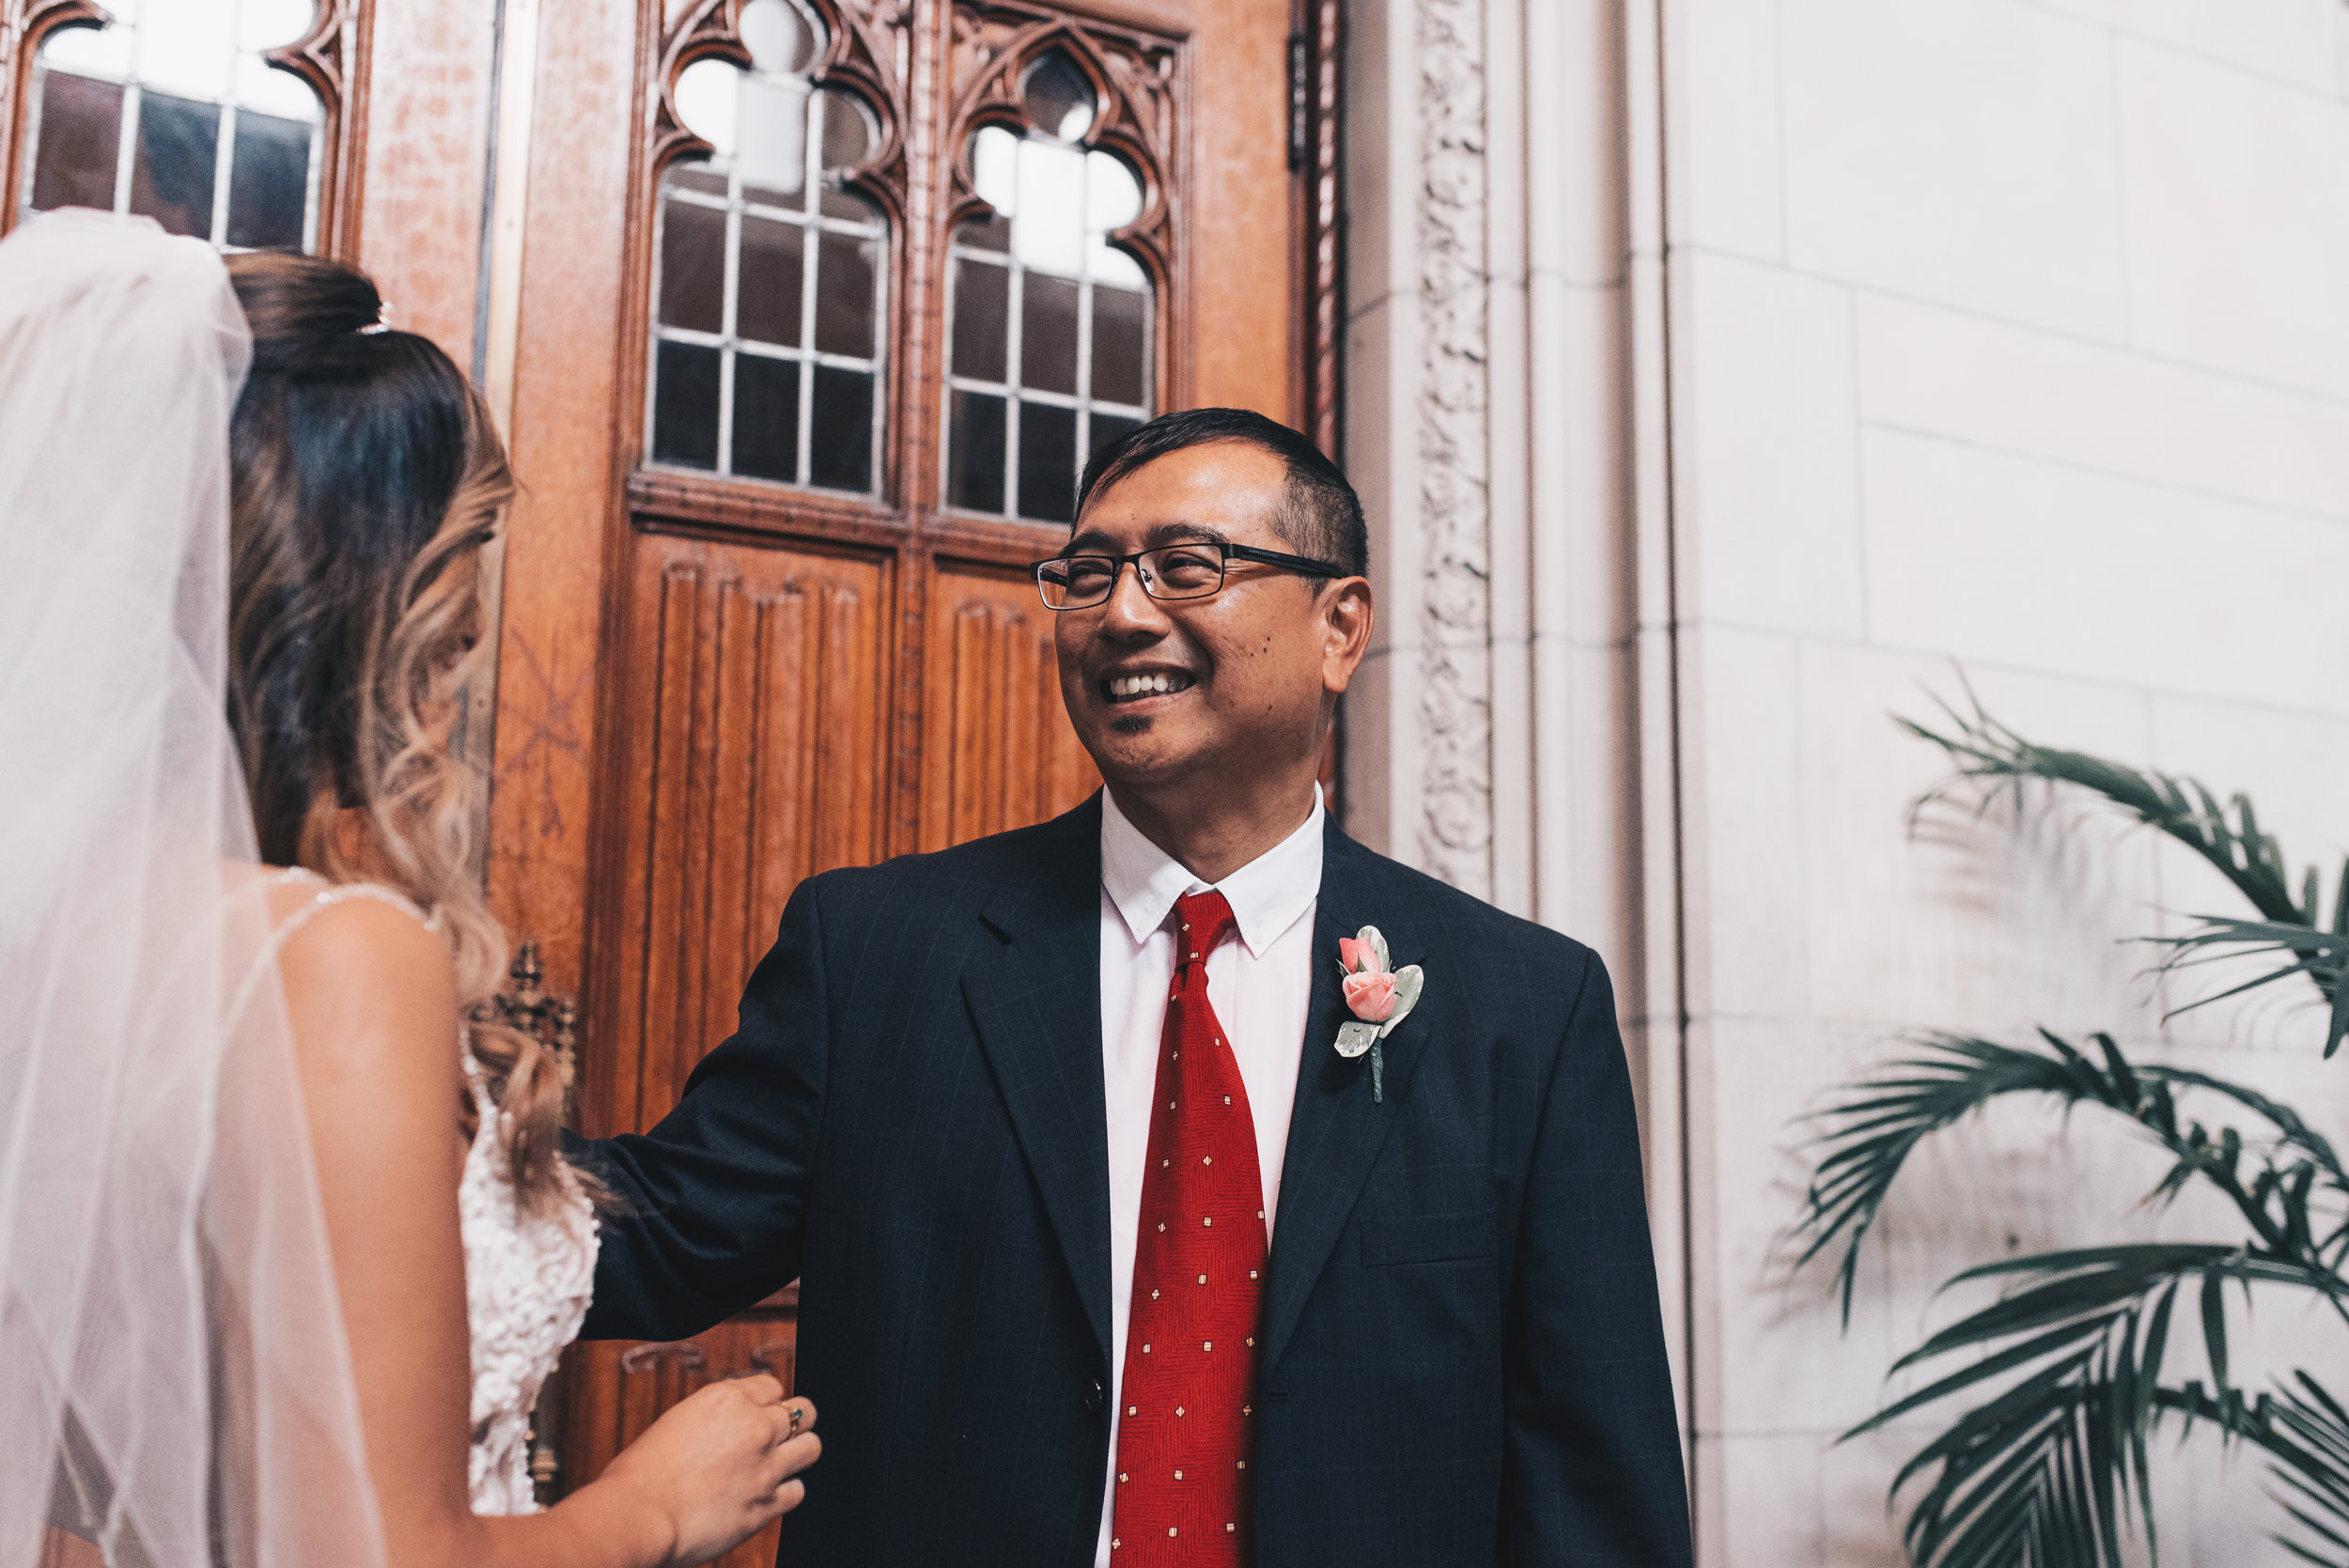 Chicago Bride and Groom Photos, Chicago Wedding, Chicago Wedding Photographer, Chicago Elopement Photographer, Father and Bride First Look